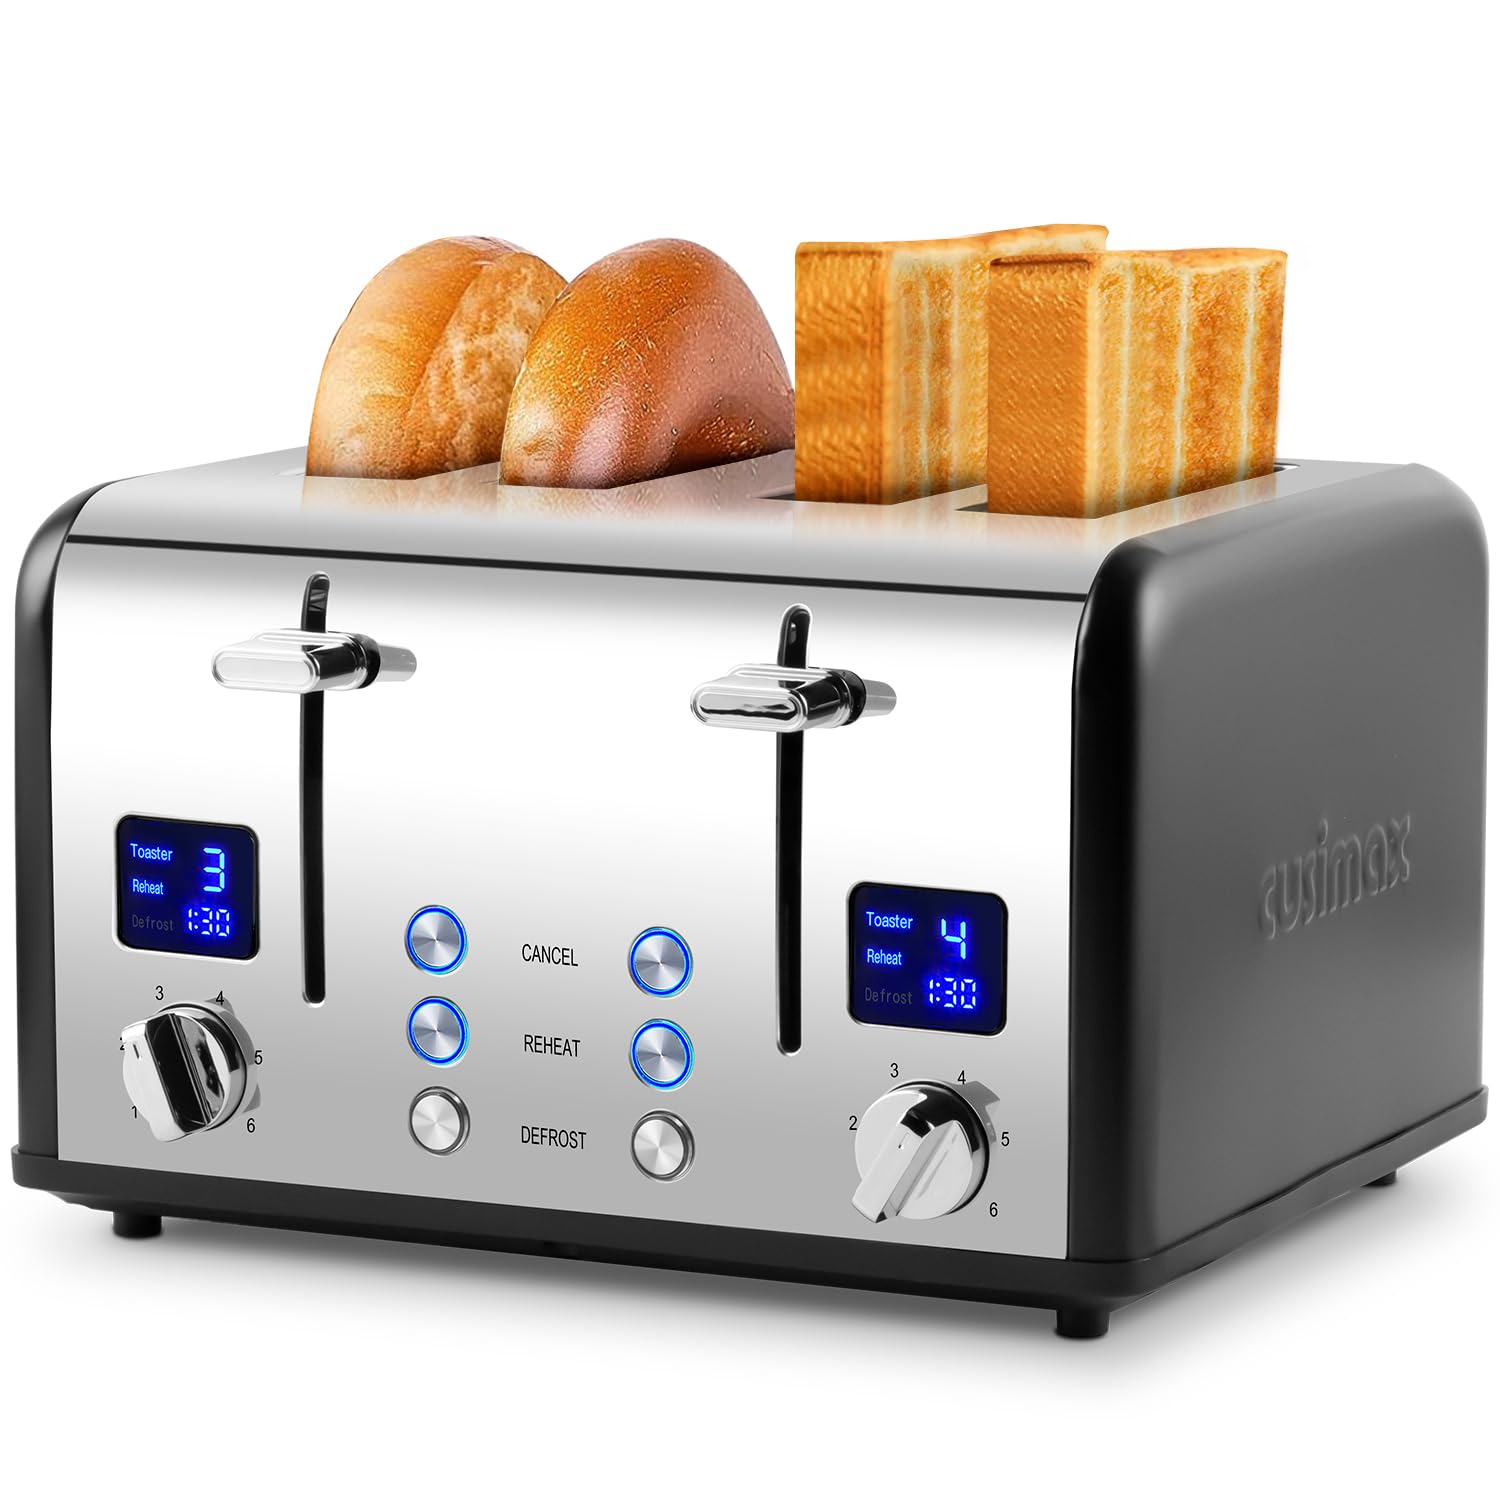 Cusimax 4 Slice Toaster, Stainless Steel Toaster with Ultra-Clear LED Display & Extra Wide Slots, Dual Control Panels of 6 Shade Settings, Cancel/Bagel/Defrost Function, Removable Crumb Trays(UK)